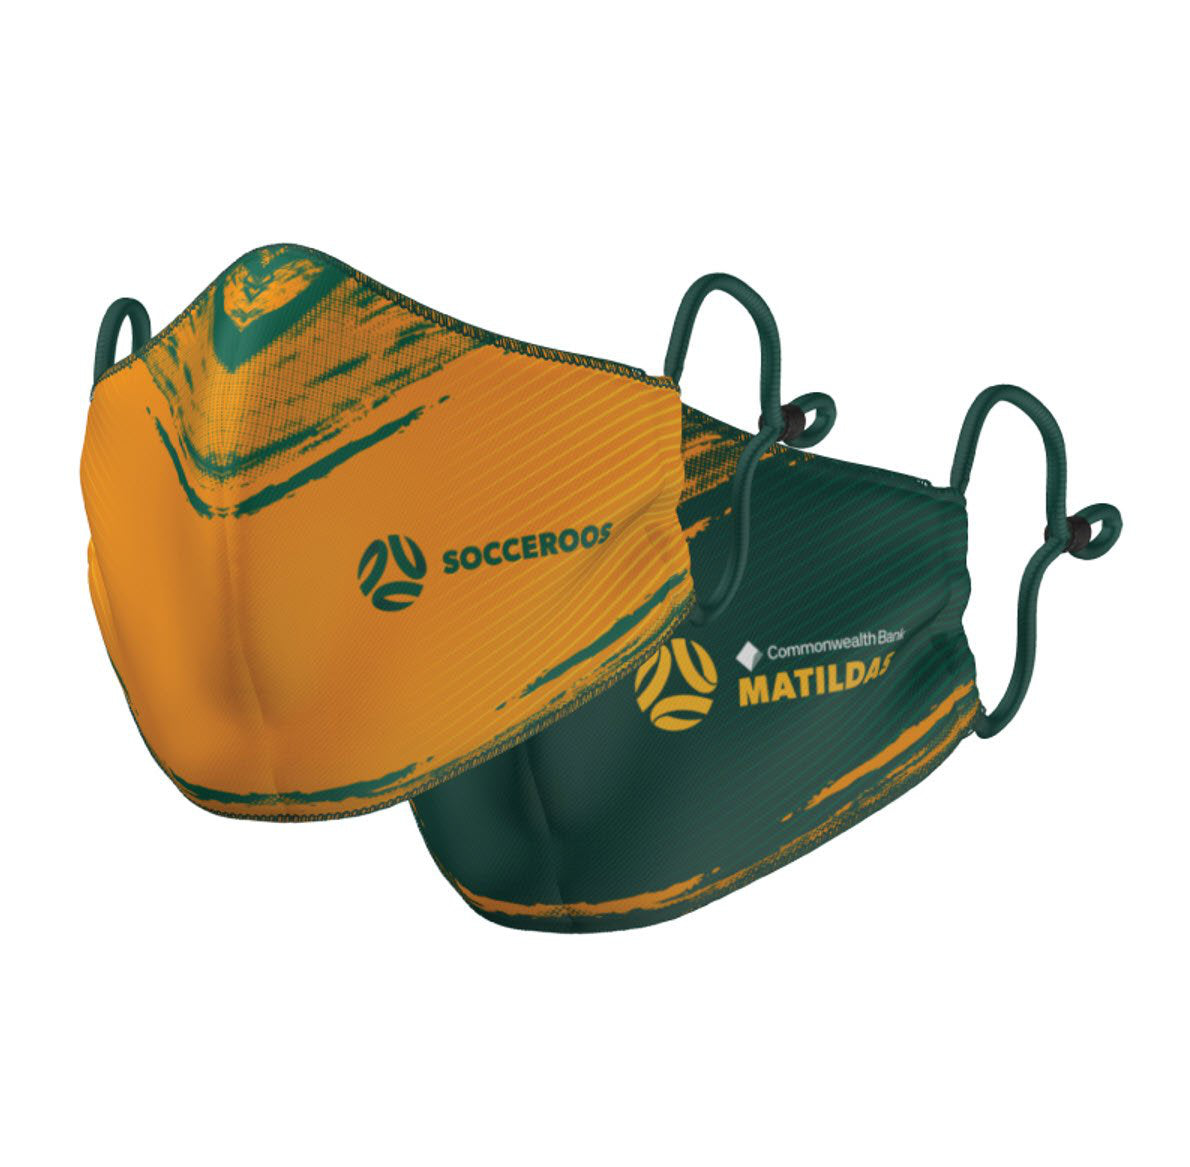 Socceroos & Matildas Face Mask Reversible Washable: 3 Sizes available